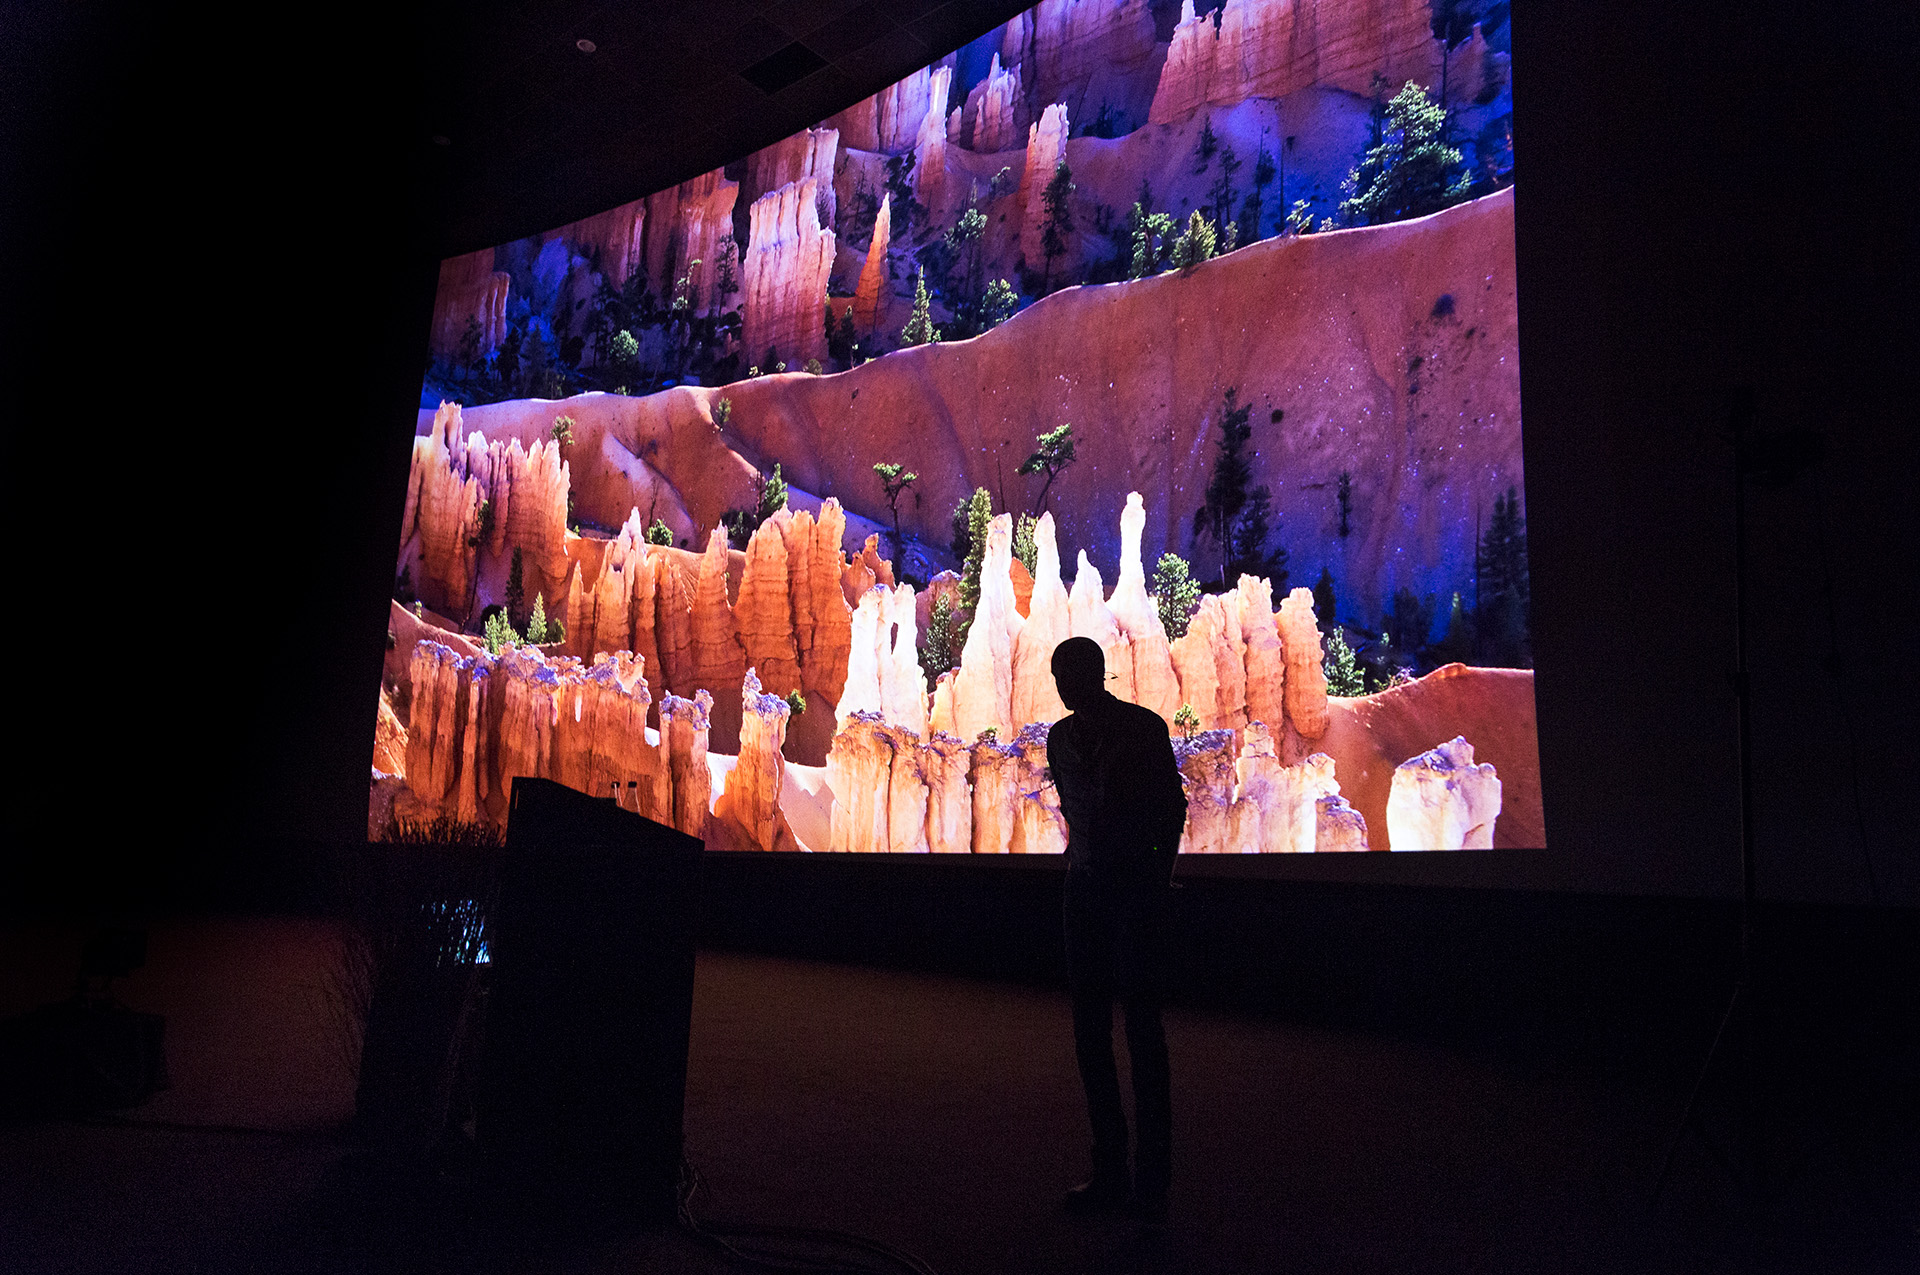 Image of Bryce Canyon National Park, slide in lecture of Martin van Lokven.